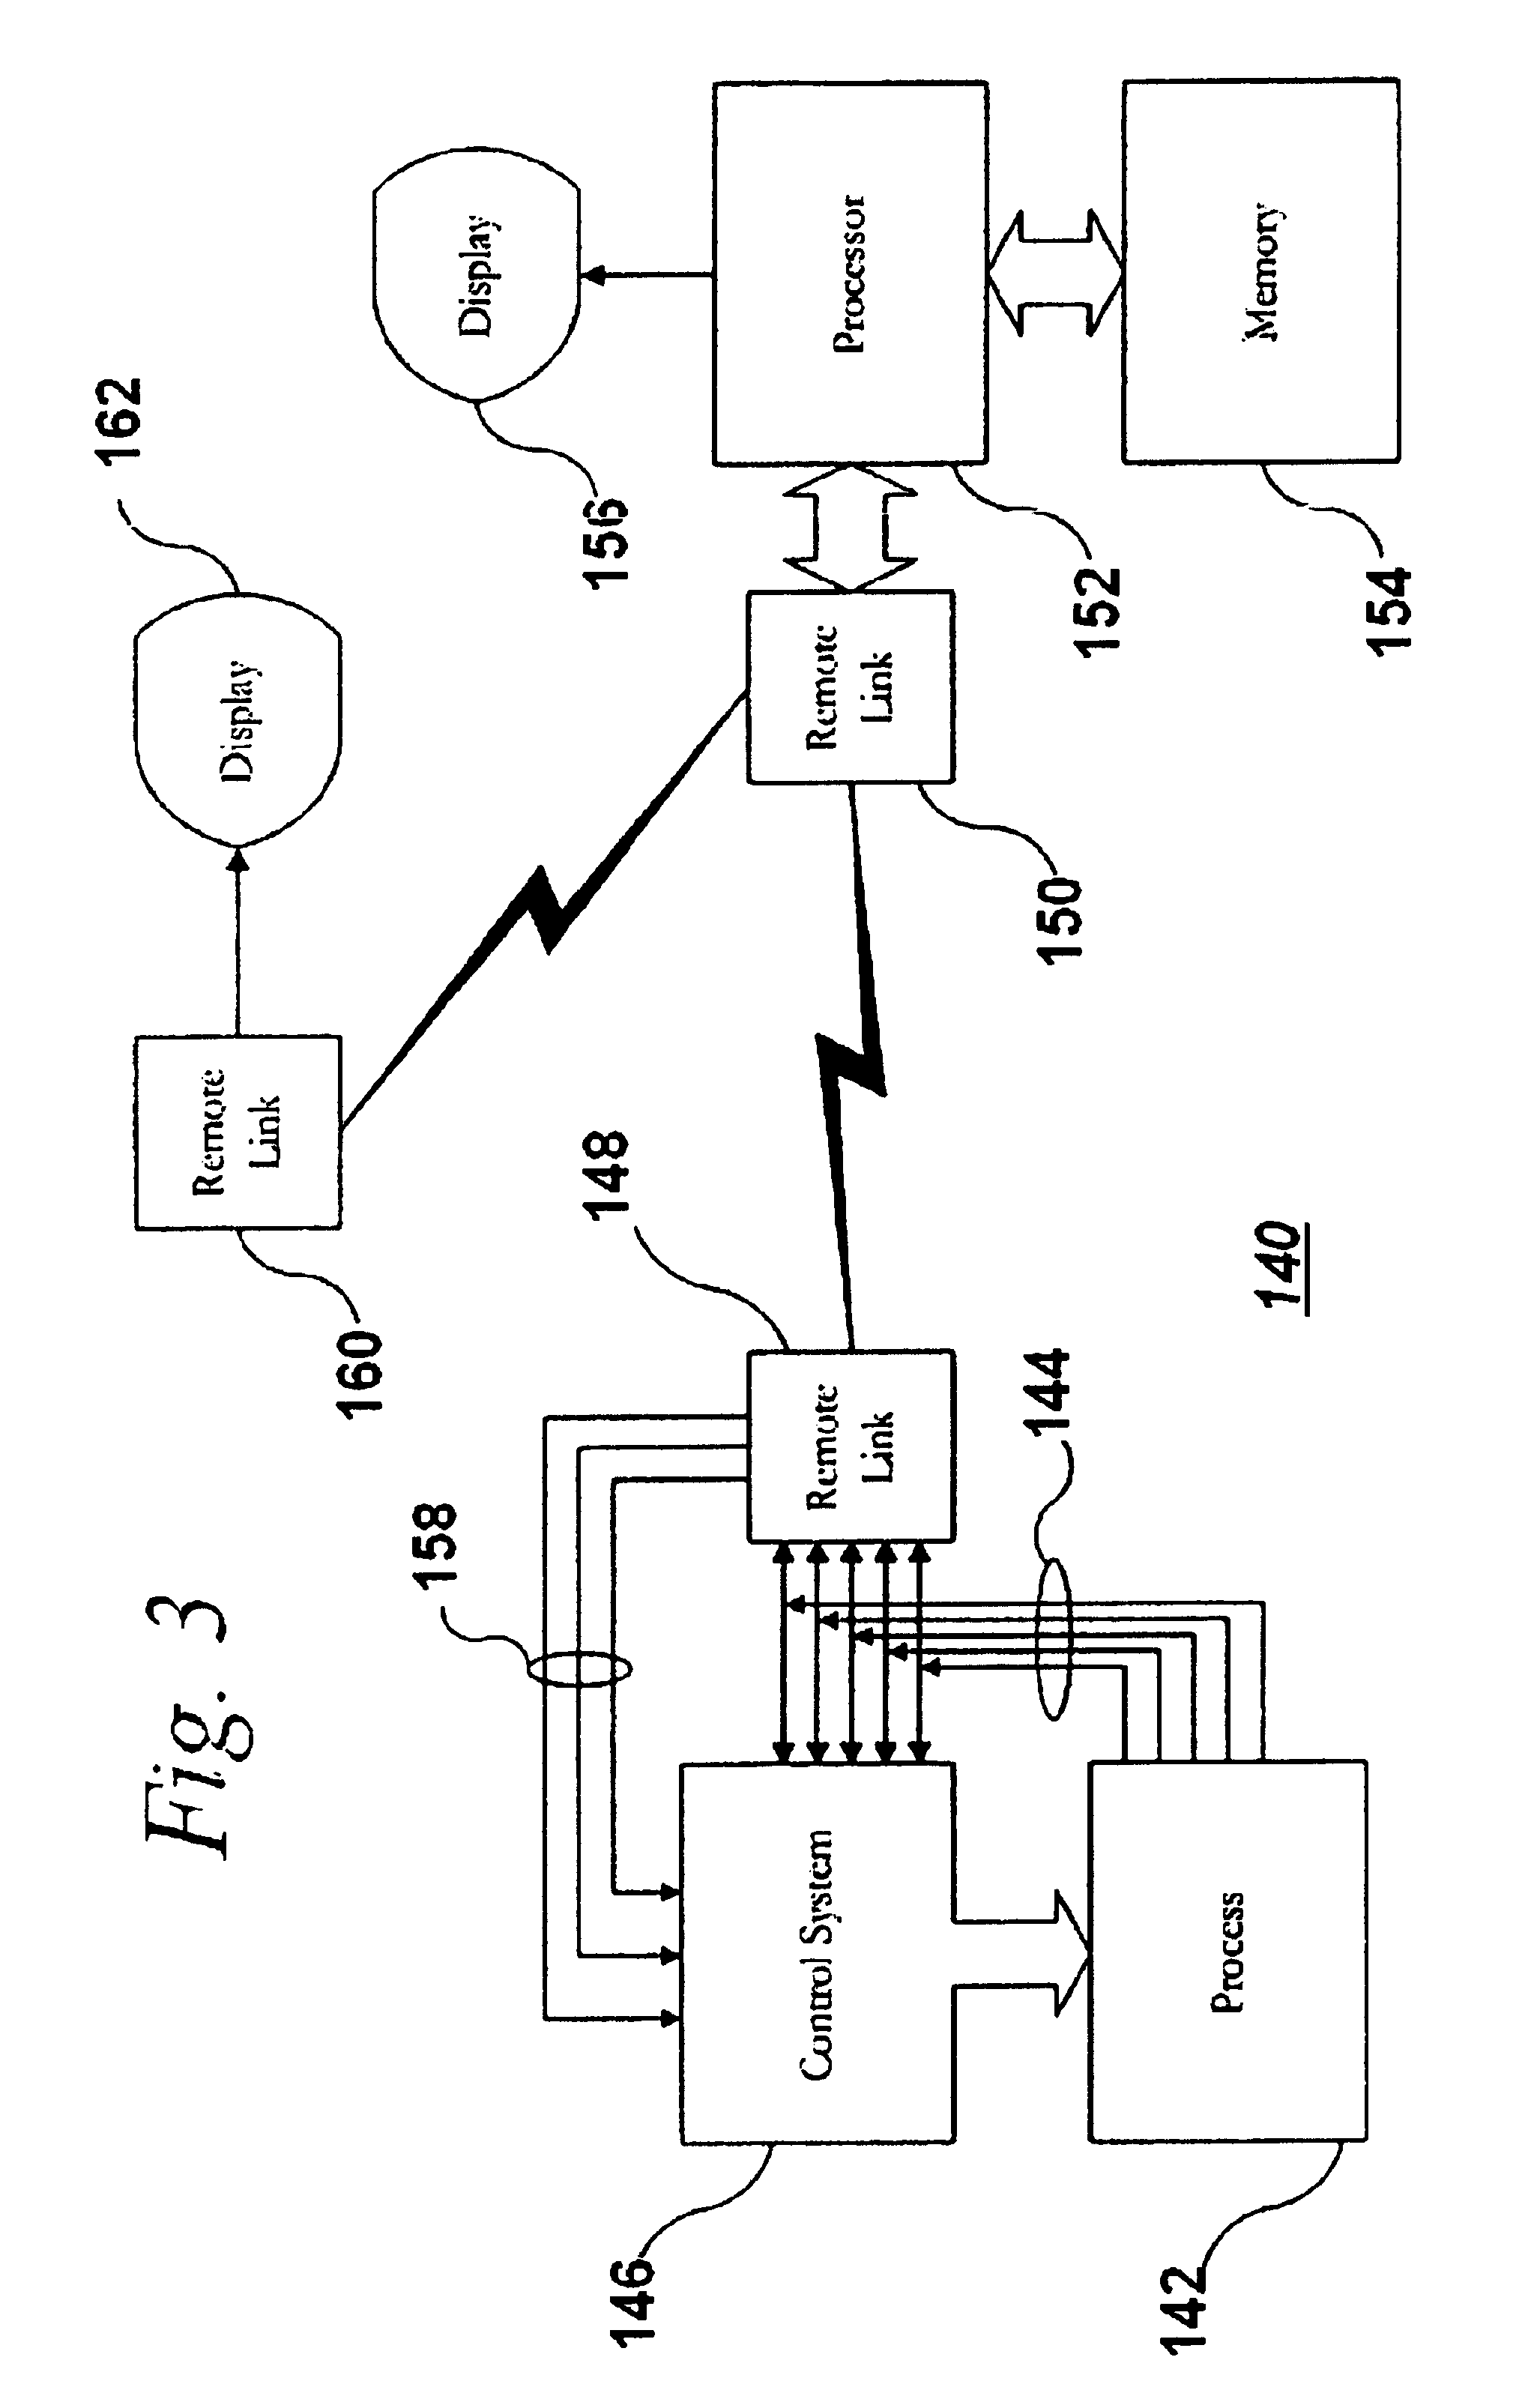 Signal differentiation system using improved non-linear operator